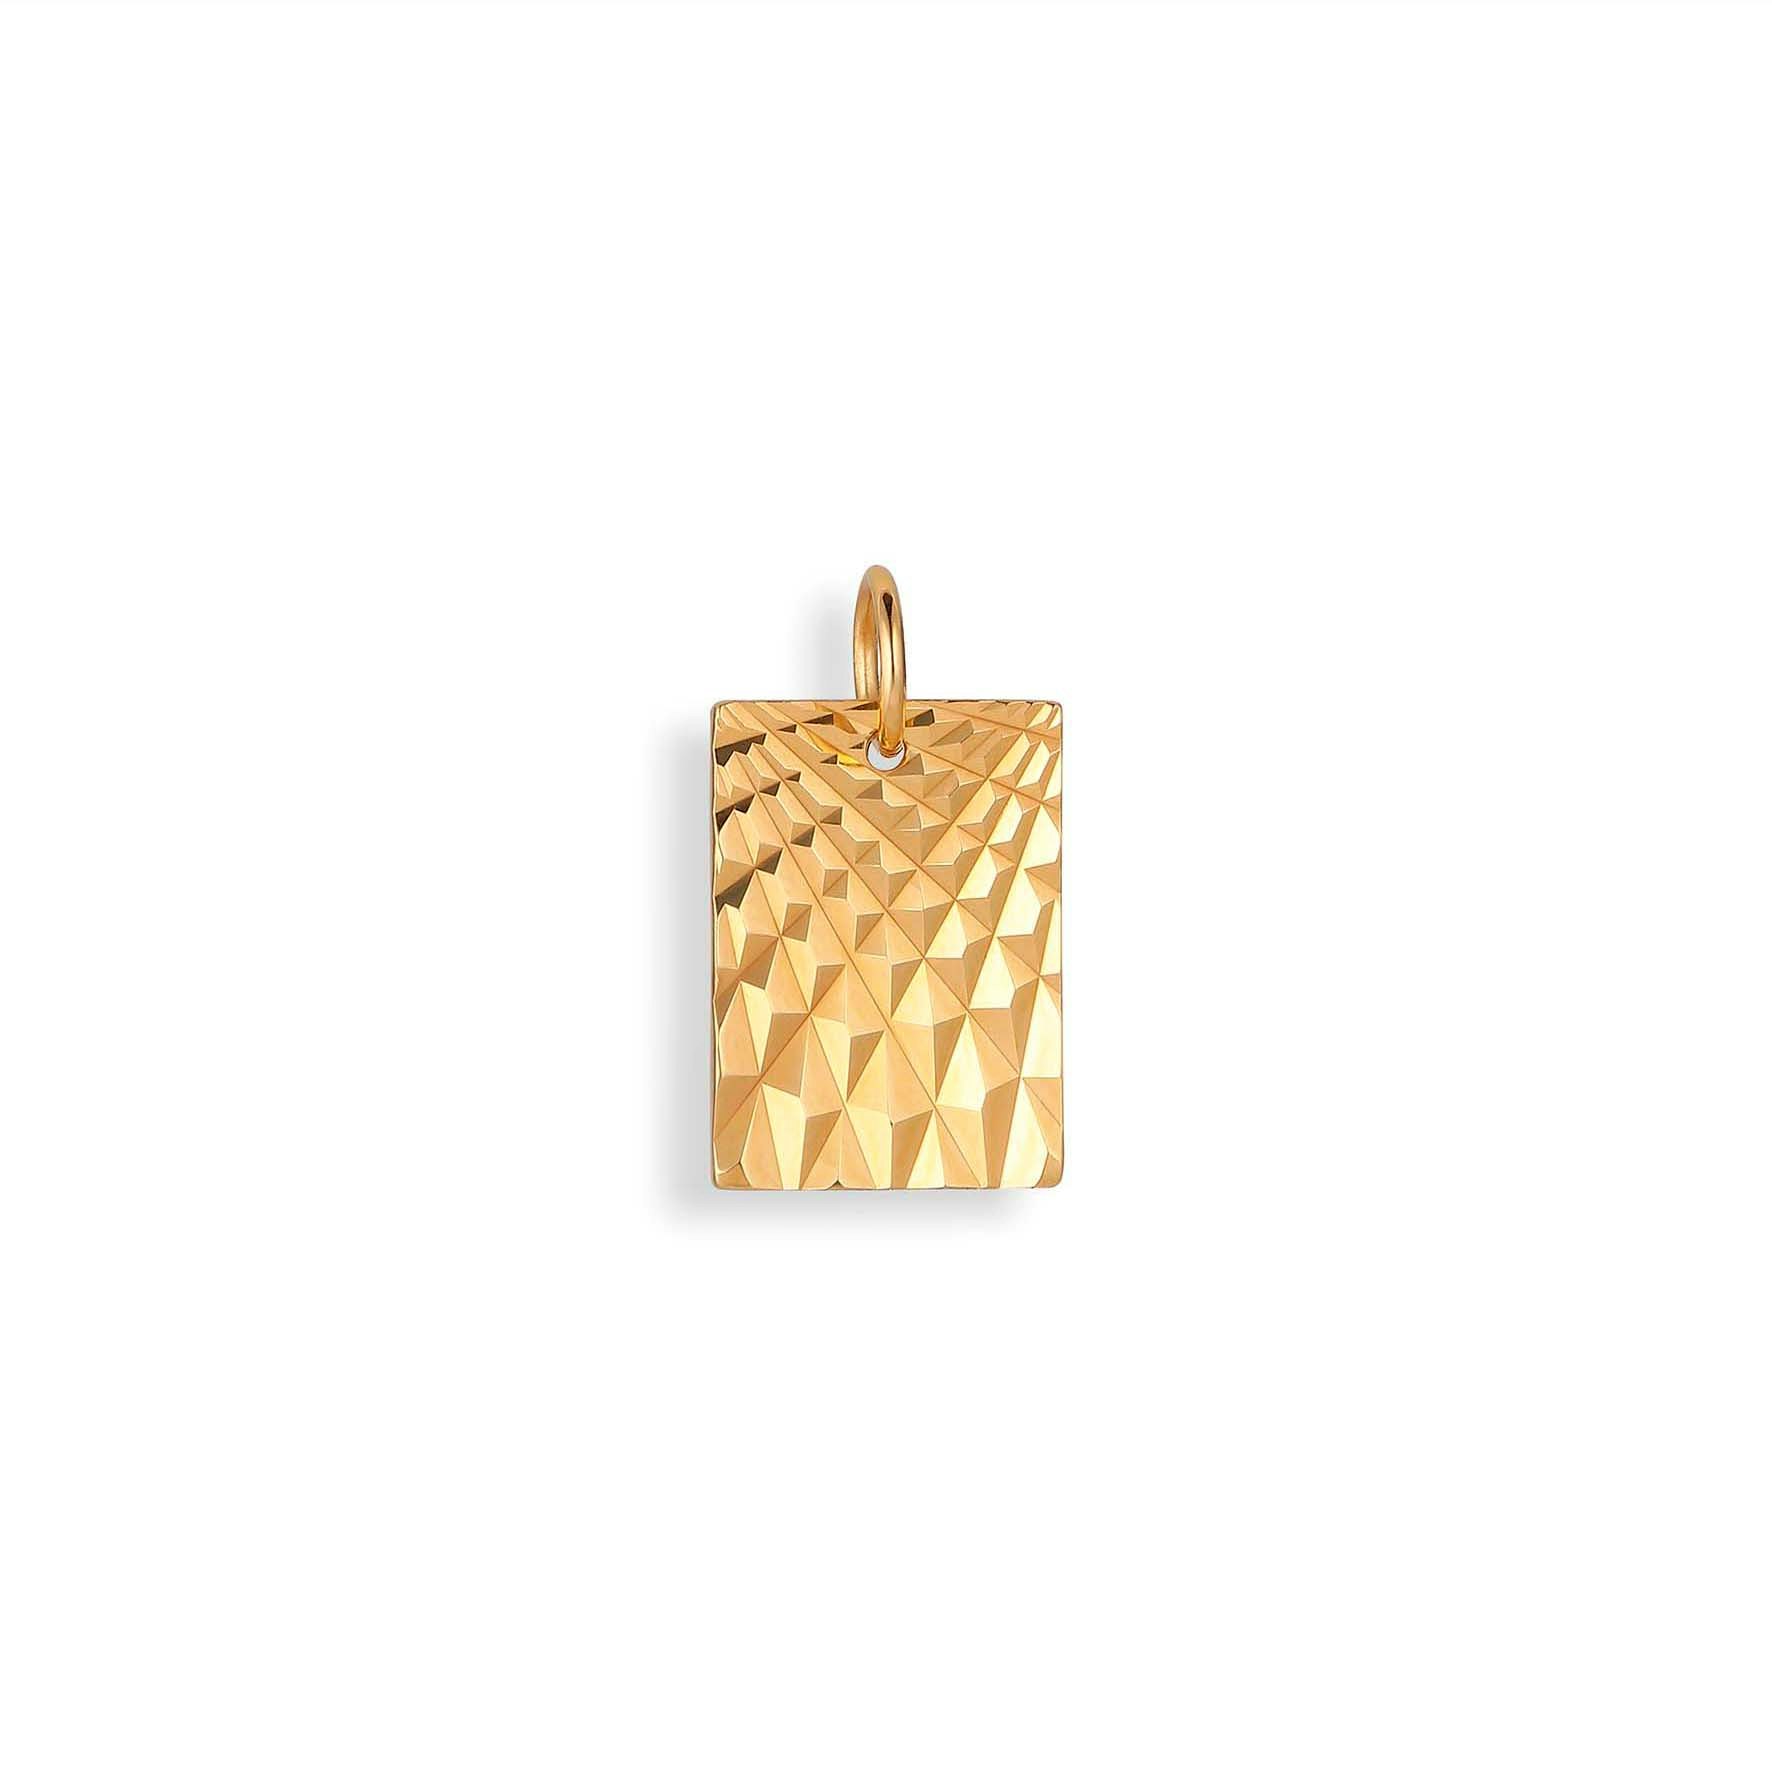 Reflection Square Pendant from Jane Kønig in Goldplated Silver Sterling 925